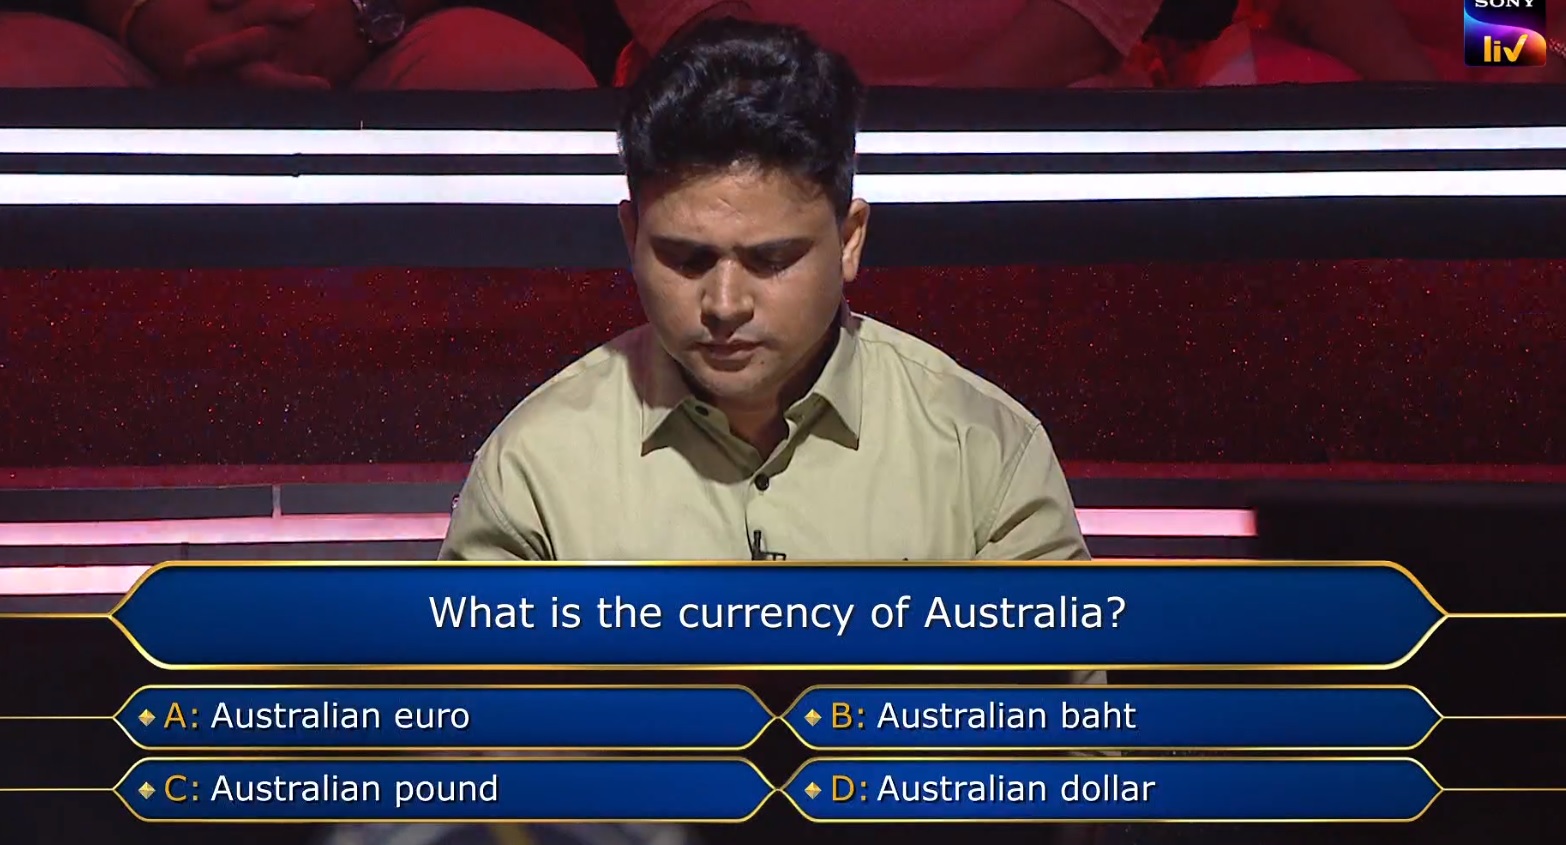 Ques : What is the currency of Australia?